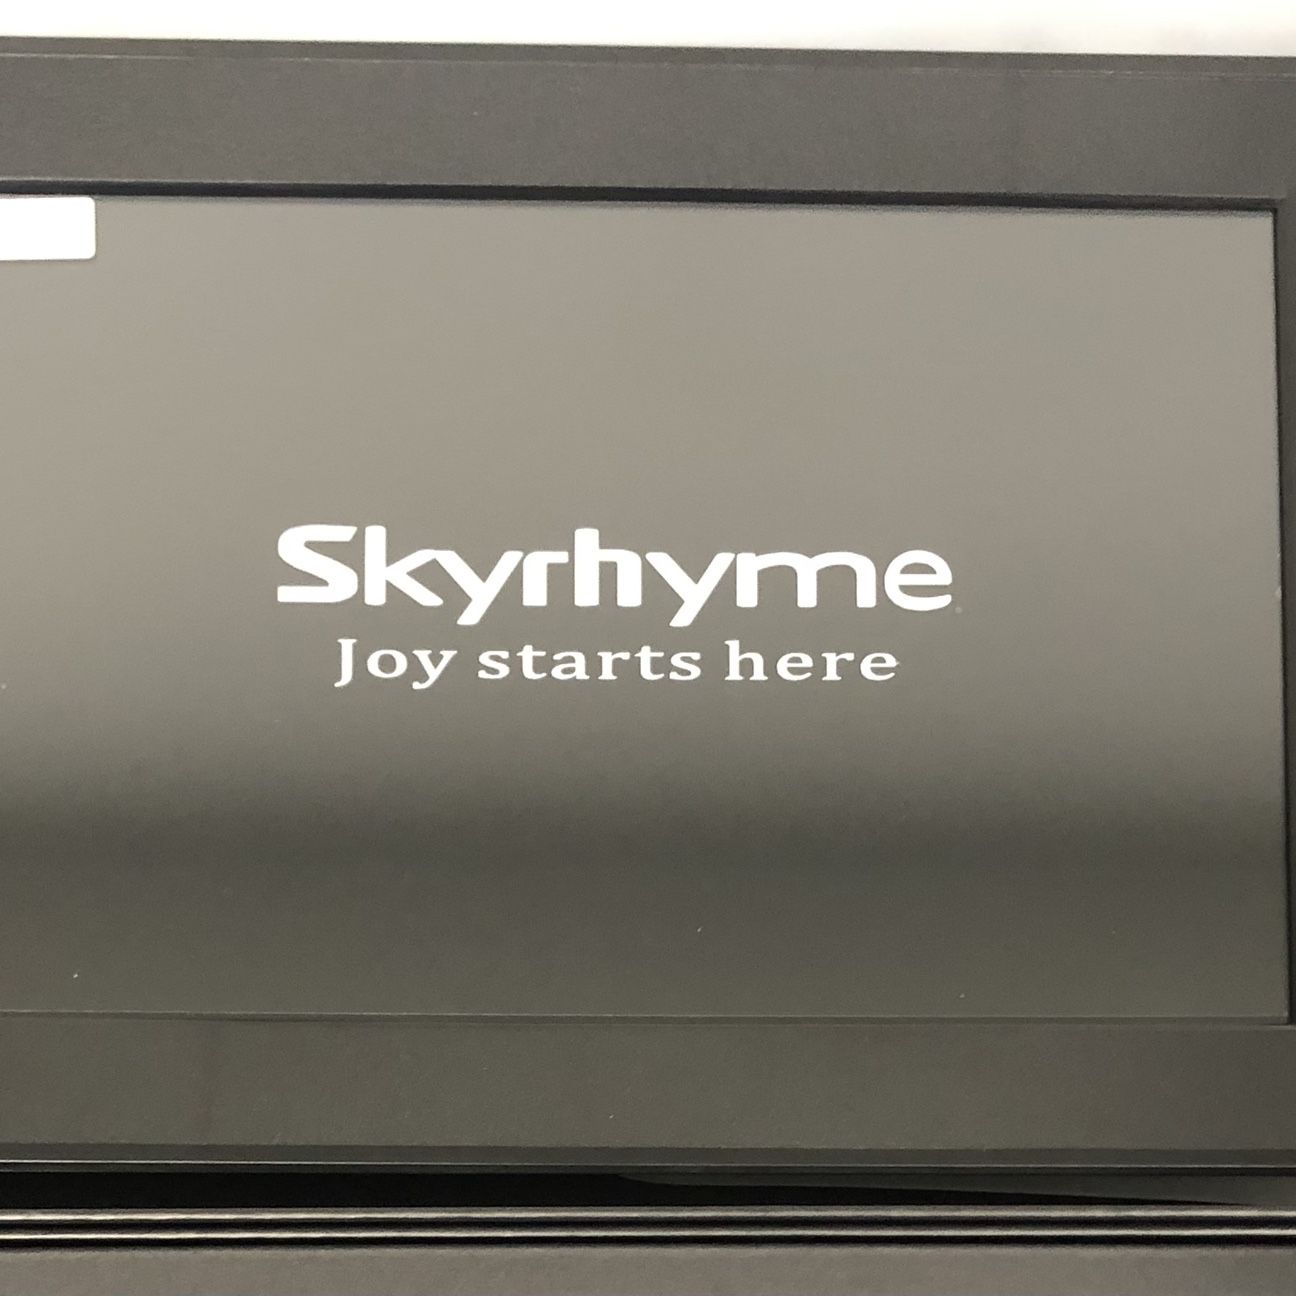 SKYRHYME 10.1 Inch Digital Picture Frame, FRAMEO WiFi Digital Photo Frame  with 1280 800 IPS Touch Screen,16GB Storage, Auto-Rotate Slideshow, Easy t  for Sale in New Castle, DE OfferUp